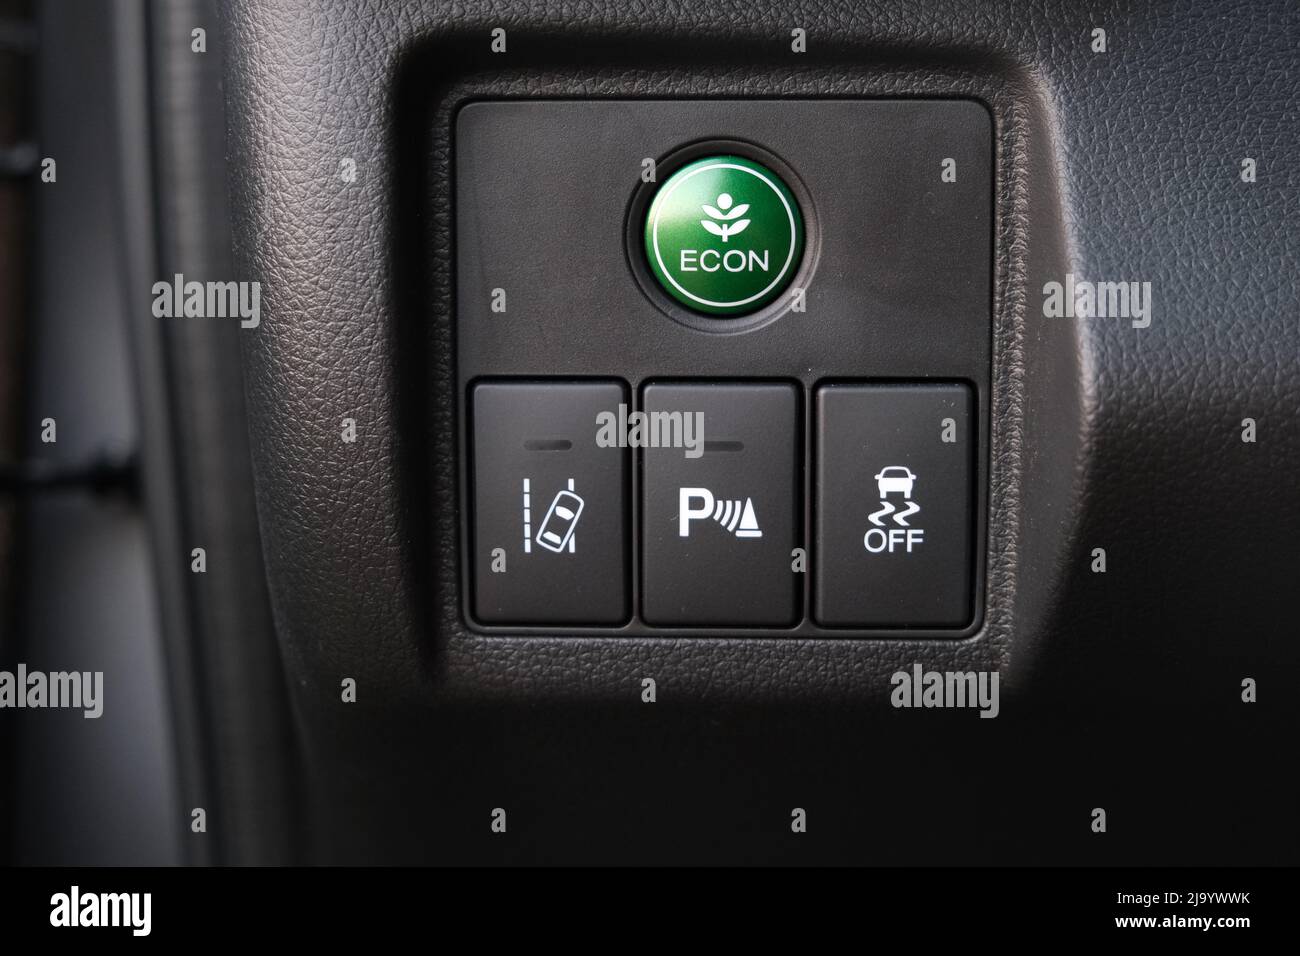 Economic mode button, lane keep assist, parking assist and electronic stability programme (esp) button inside car Stock Photo